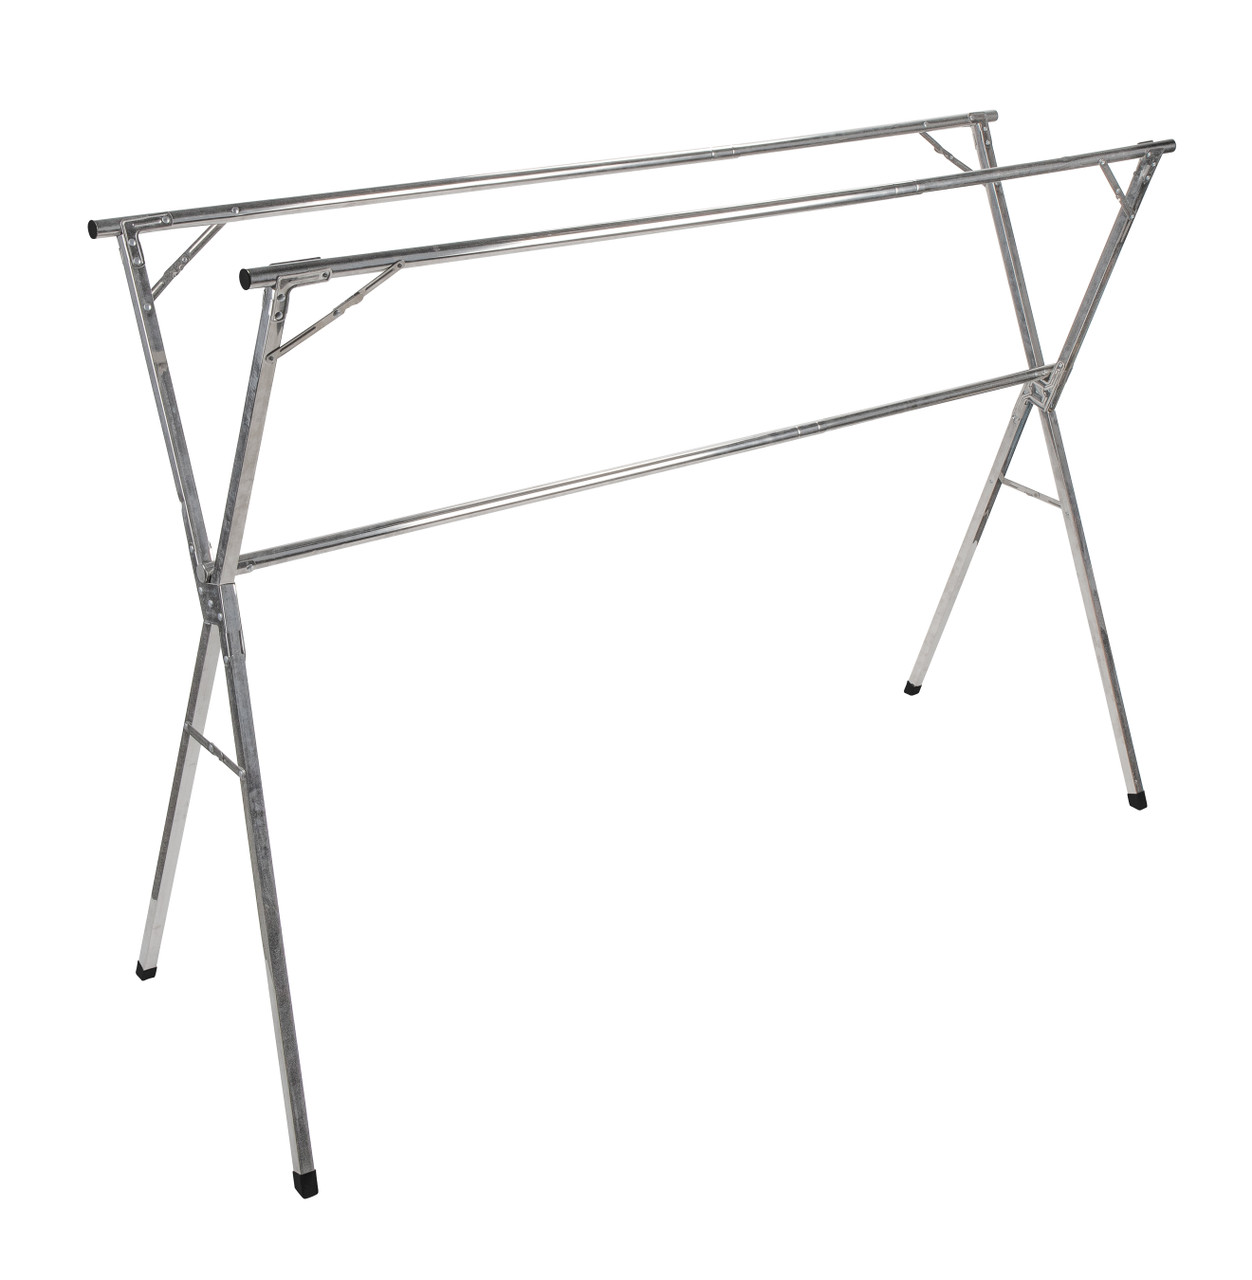 Camco Portable Clothes Drying Rack, Features 3 Horizontal Drying Rods &  Adjusts from 60 to 95 Long